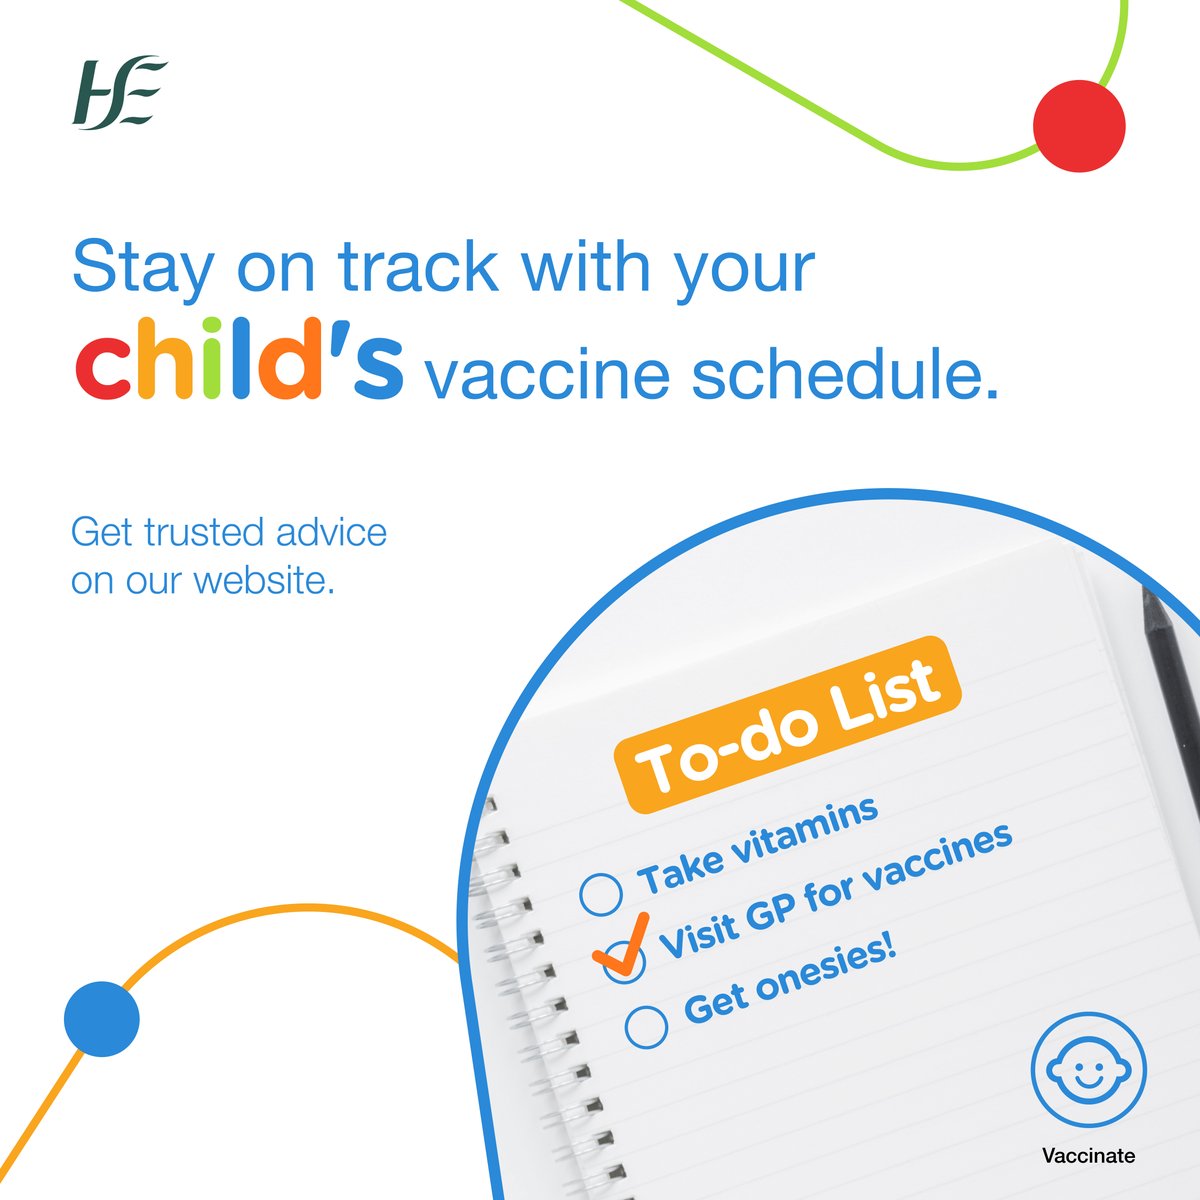 It's European Immunisation Week. There's no better time than the present to get your child's vaccine schedule back on track. Vaccines are quick, safe and effective. Protect your baby and get them vaccinated on time. Learn more: bit.ly/3W6vnwB #EIW | #VaccinesWork